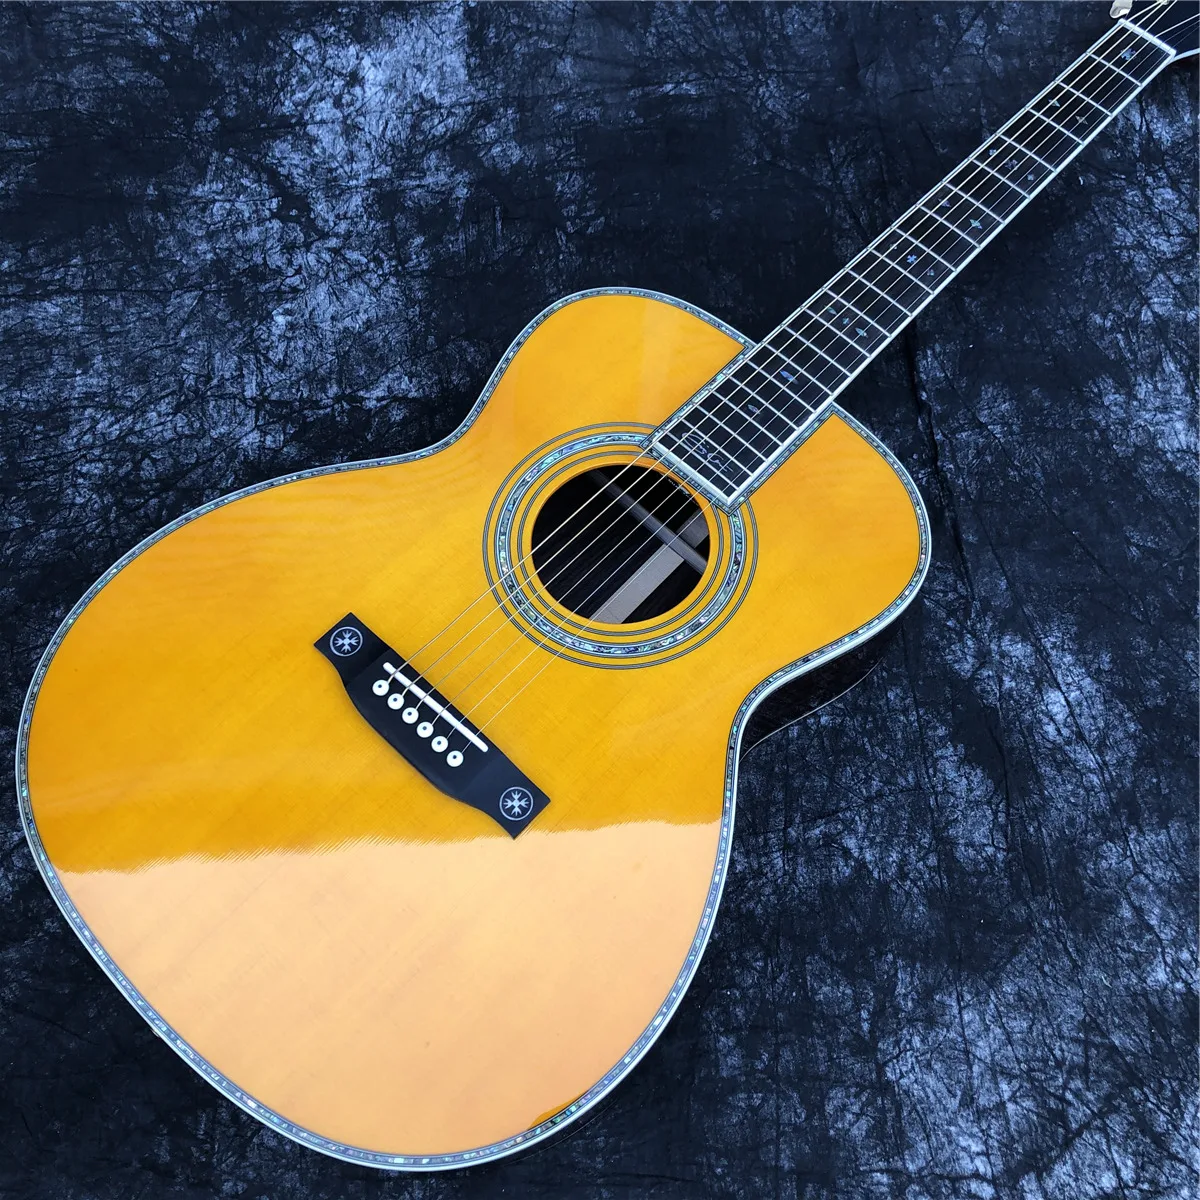 

NEW 40 Inches Yellow Solid Spruce OM Style Acoustic Guitar Real Abalone Ebony Fingerboard Guitar,Free Shipping